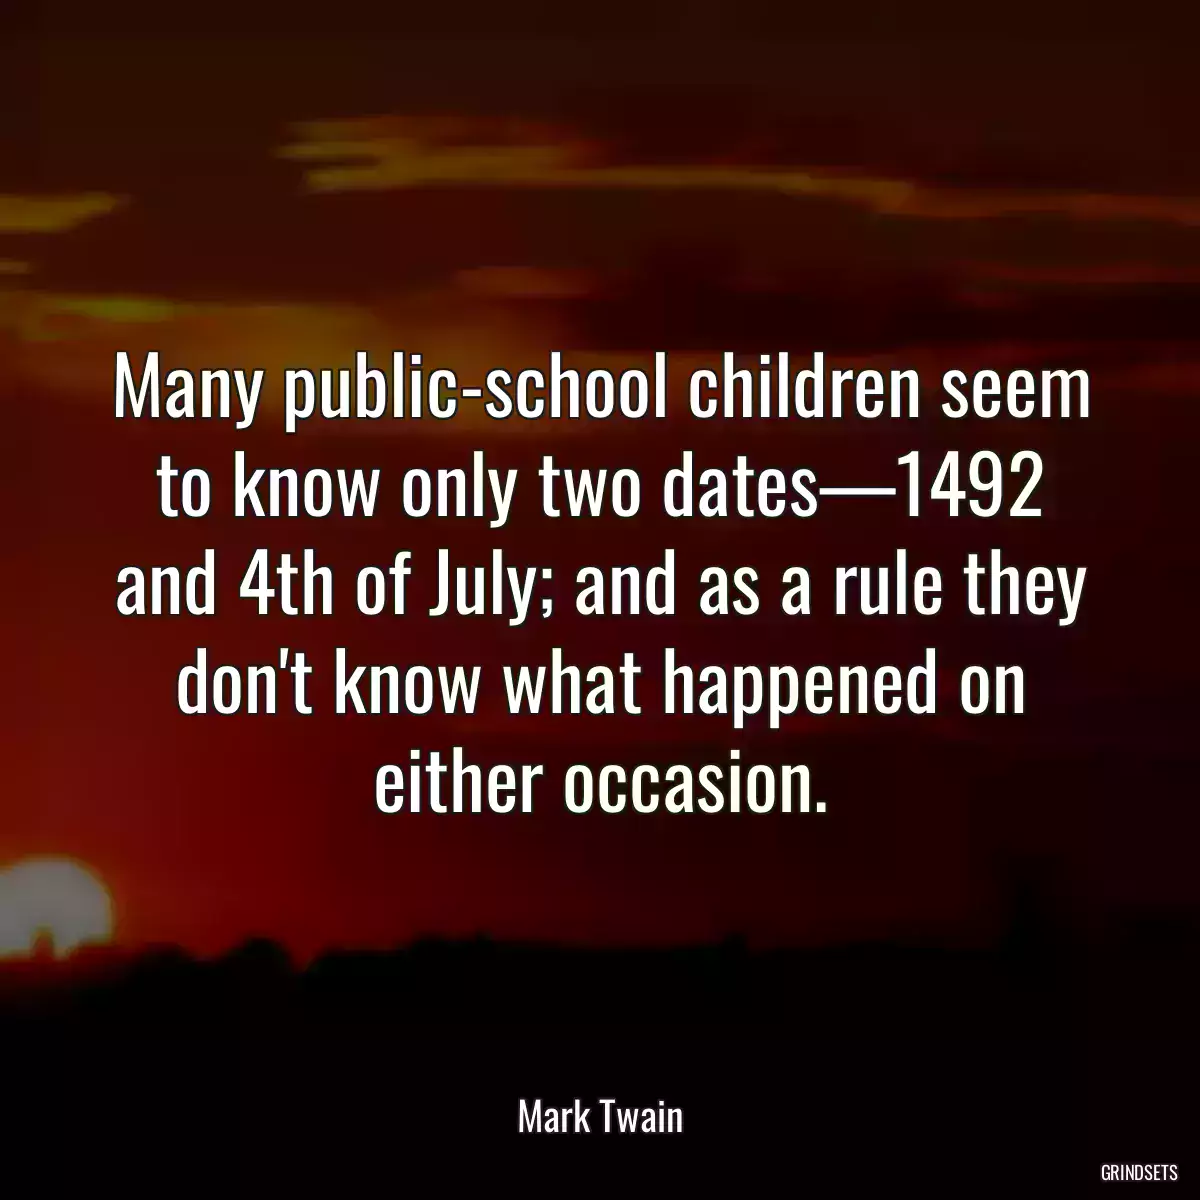 Many public-school children seem to know only two dates—1492 and 4th of July; and as a rule they don\'t know what happened on either occasion.